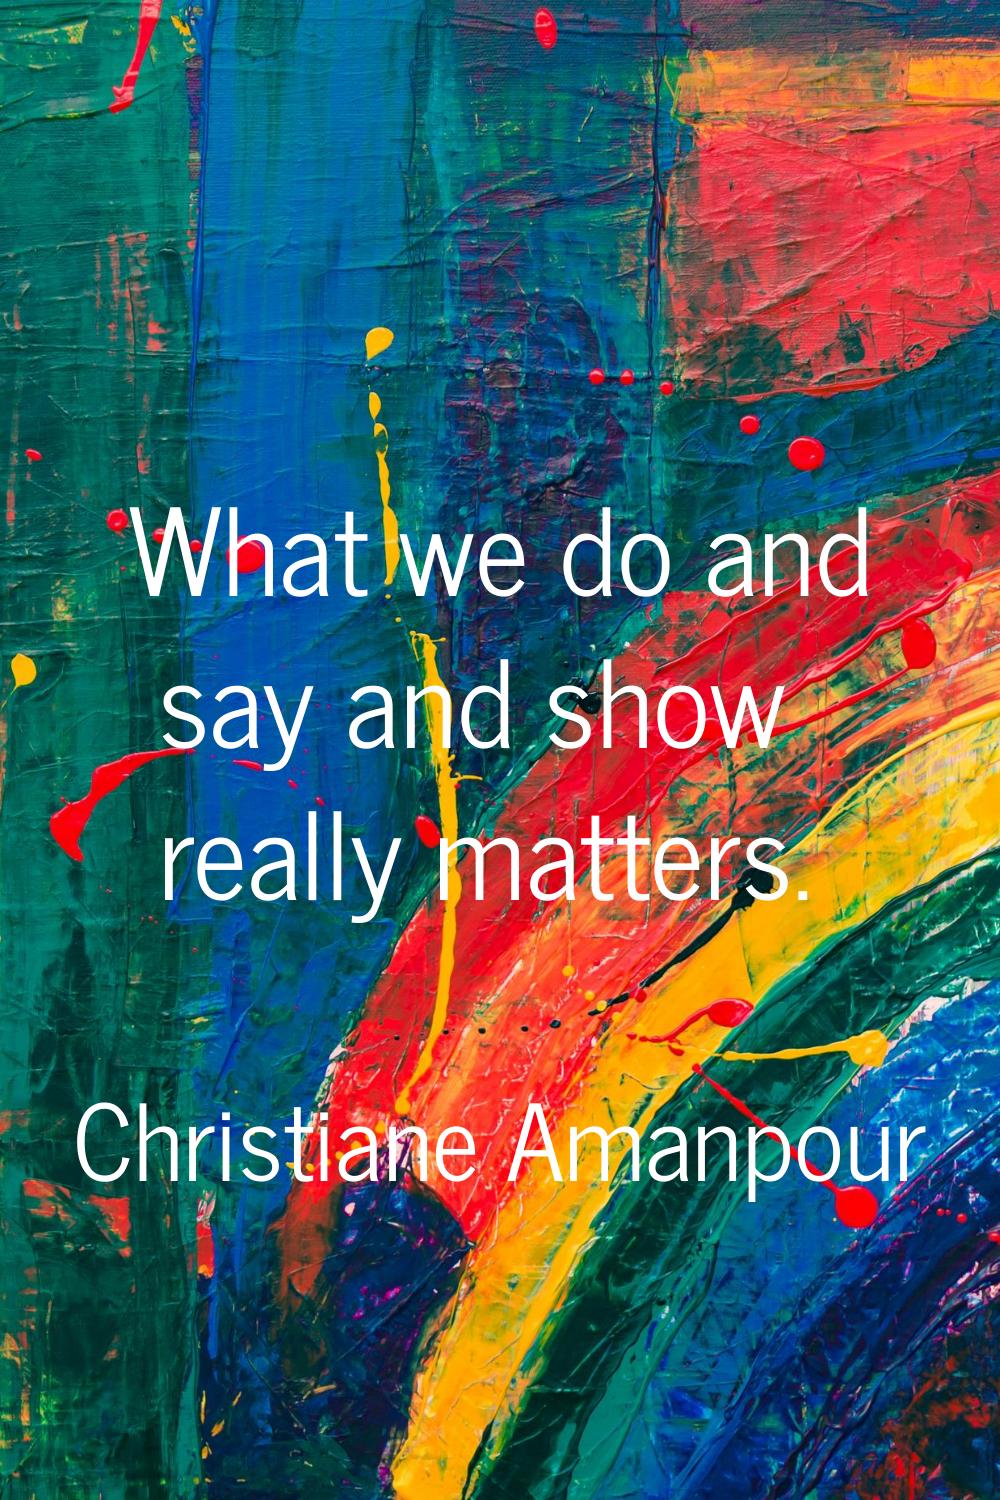 What we do and say and show really matters.